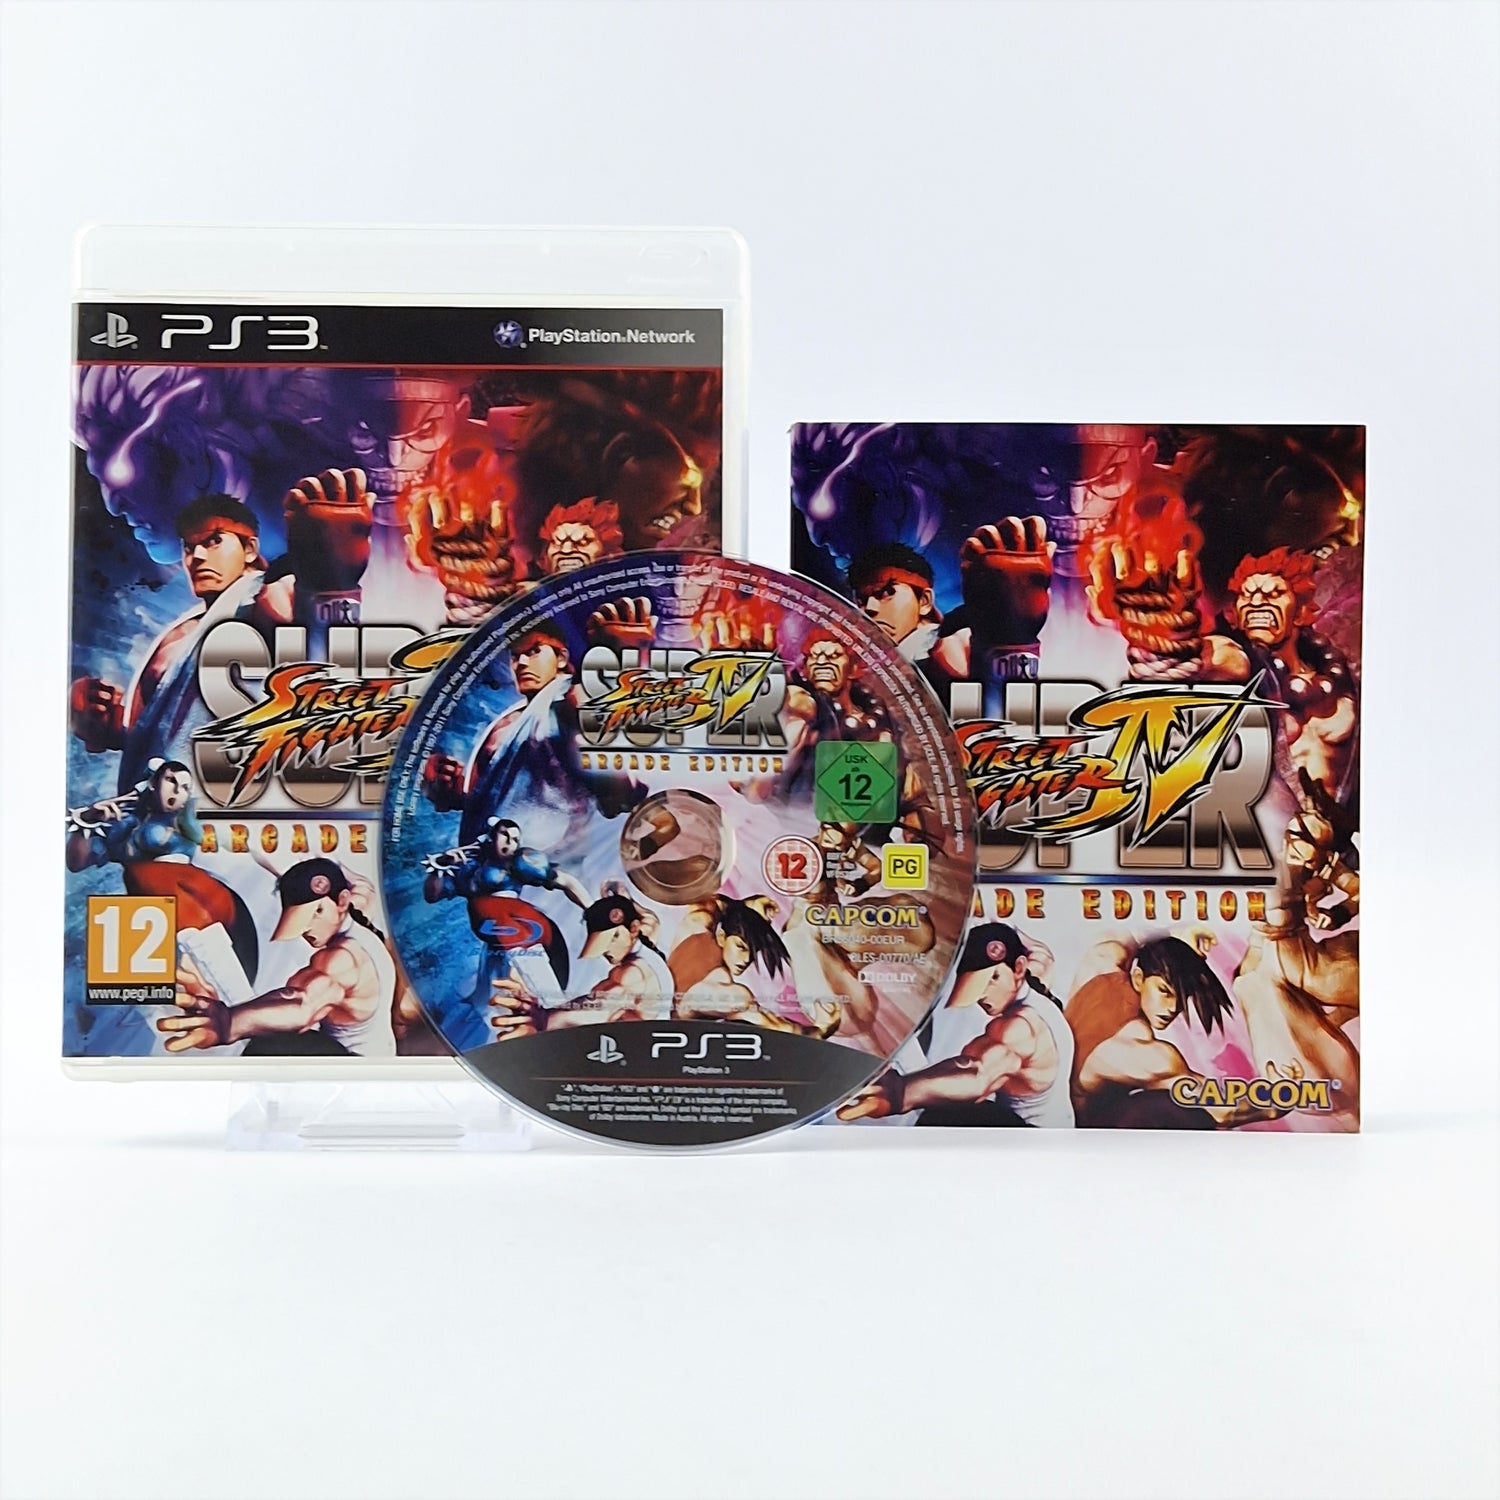 Playstation 3 game: Super Street Fighter IV Arcade Edition - OVP SONY PS3